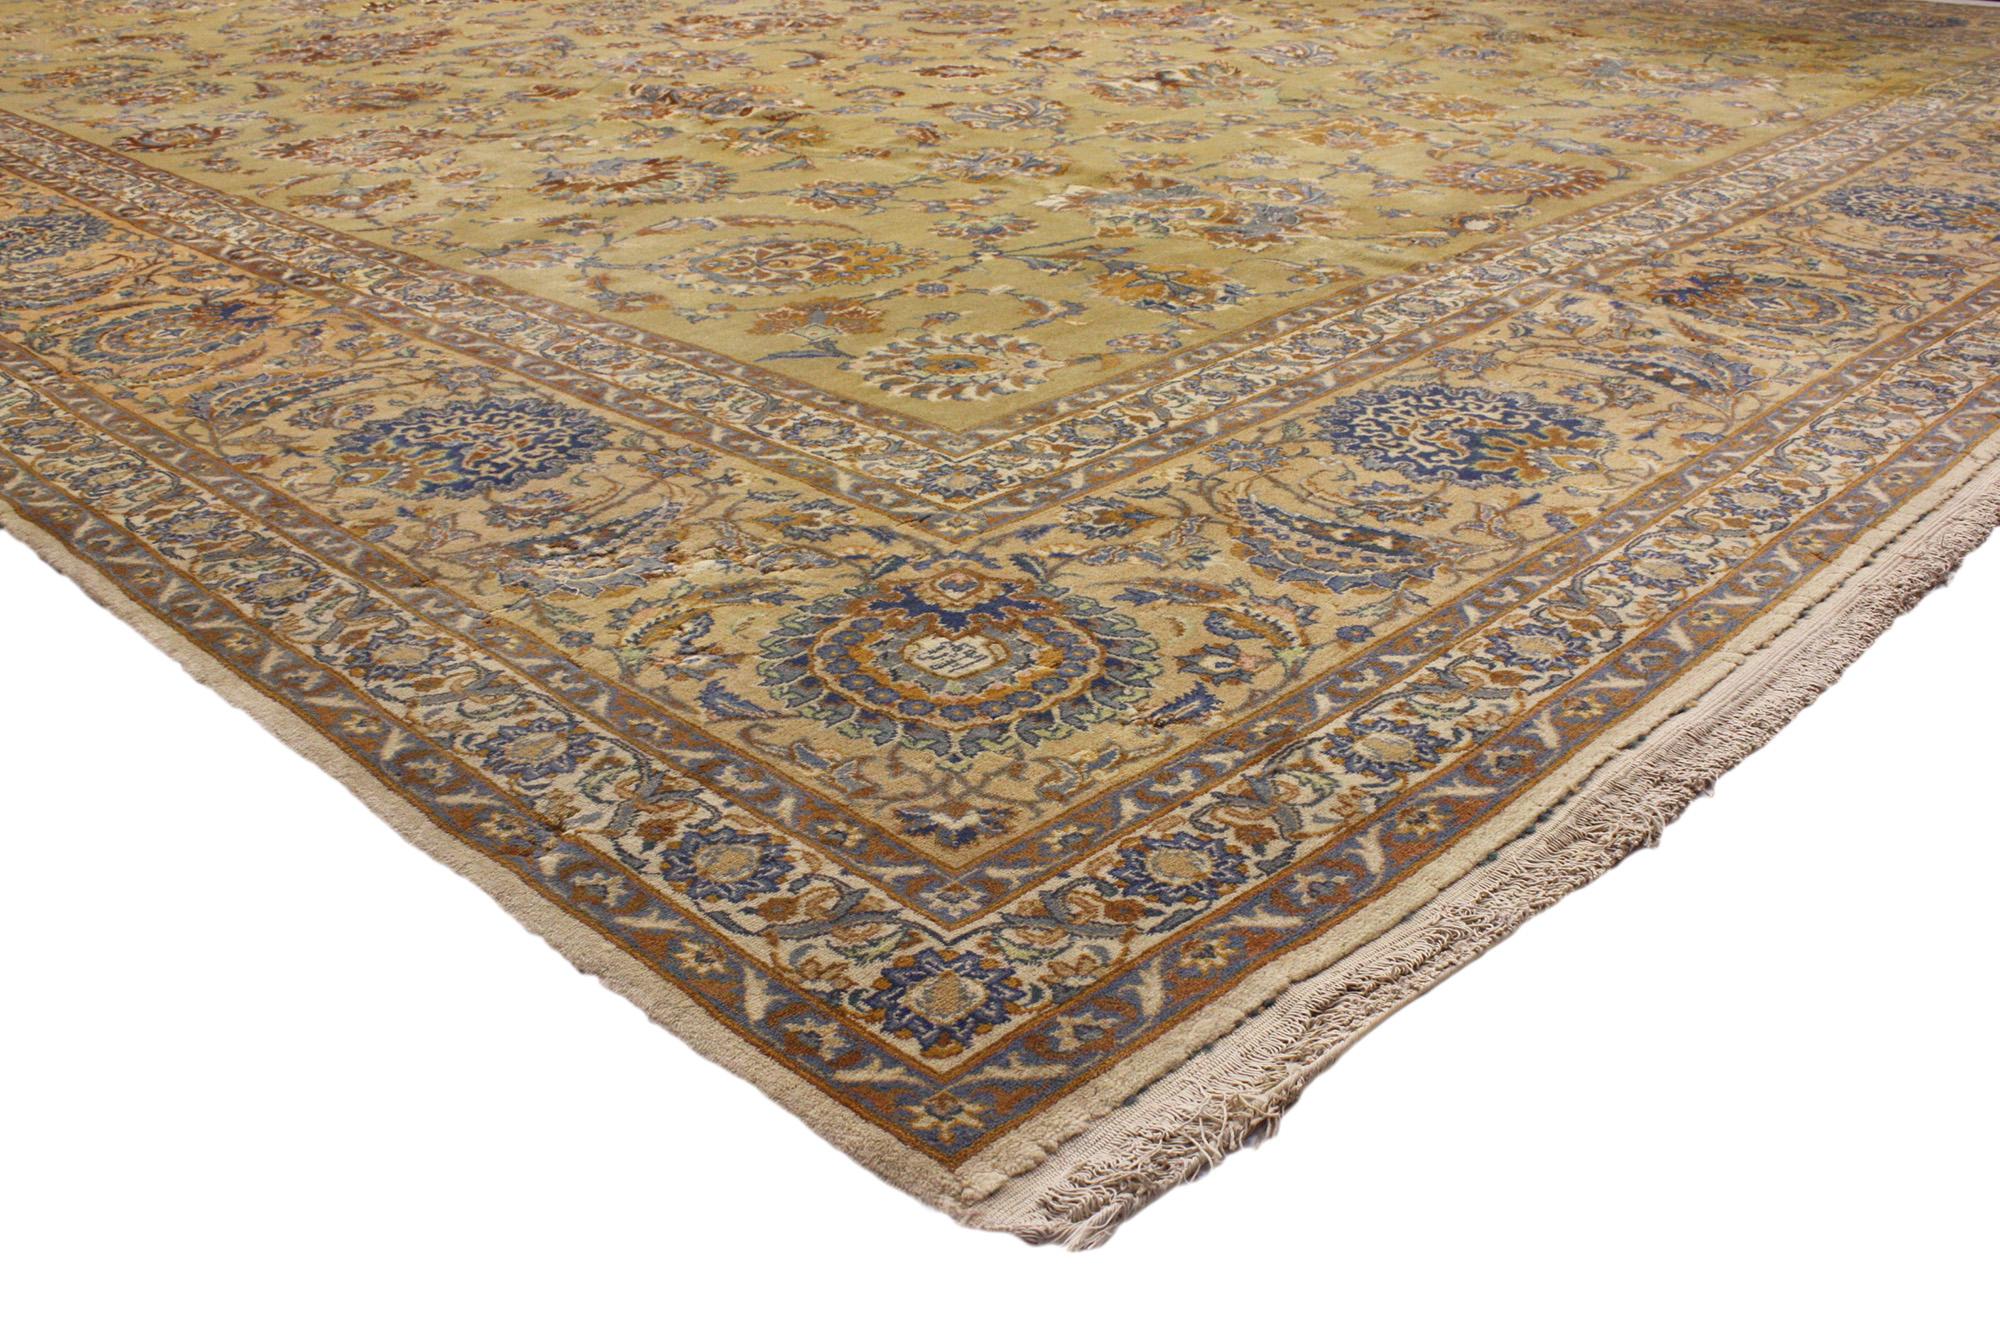 71883 Oversized Antique Persian Kashan Rug, 13'08 x 21'08. Persian Kashan rugs are meticulously crafted hand-knotted rugs originating from Kashan, Iran, celebrated for their intricate designs, superior craftsmanship, and storied heritage. Typically